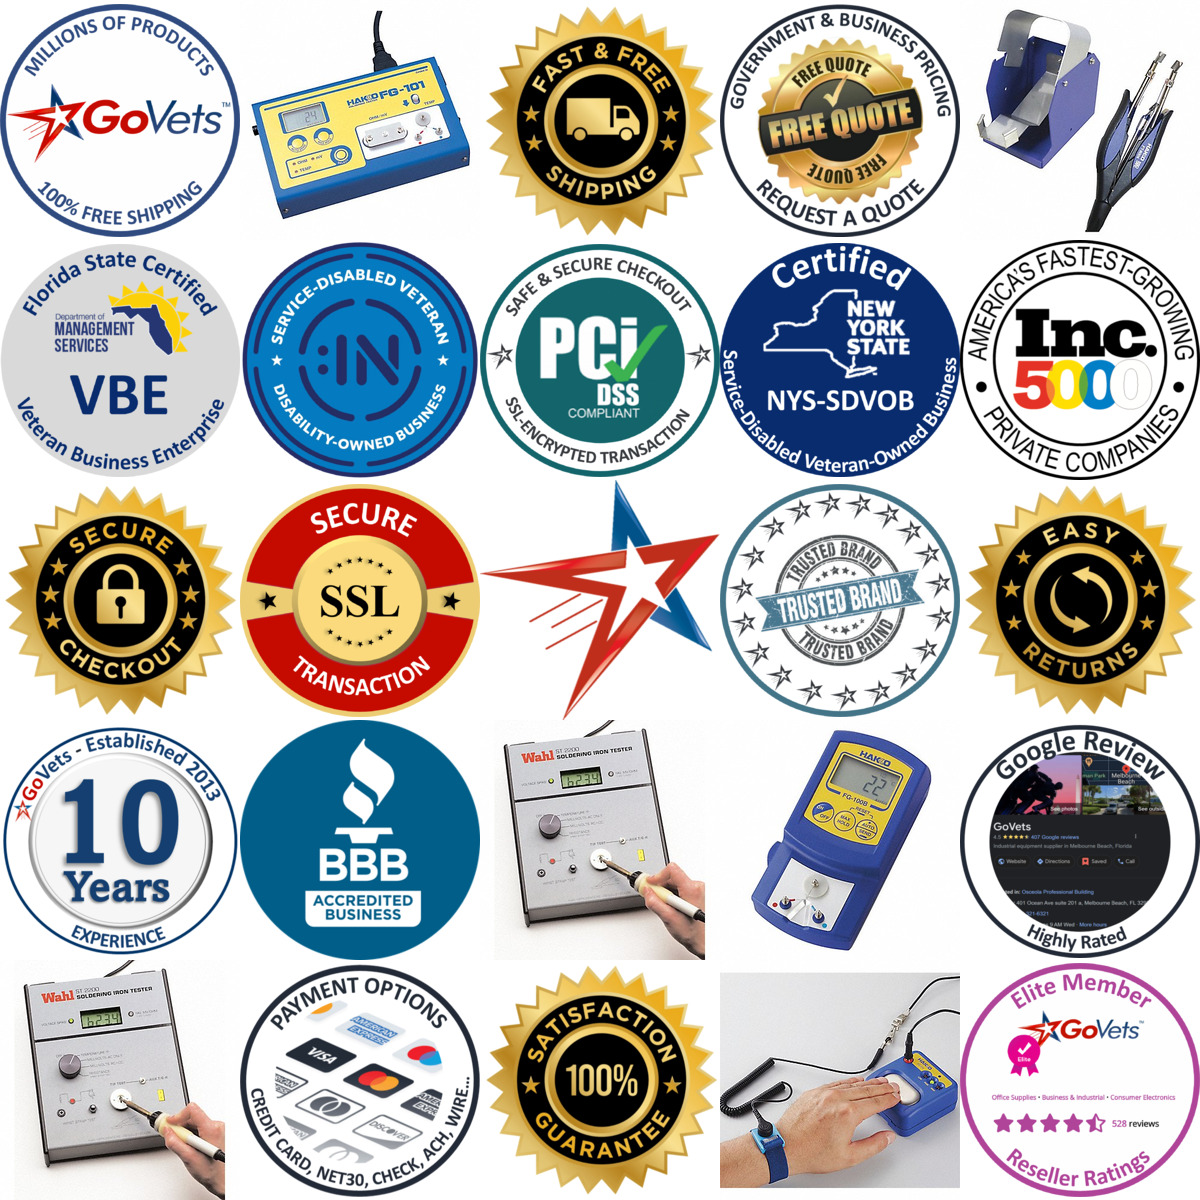 A selection of Soldering Iron Testers and Tip Thermometers products on GoVets